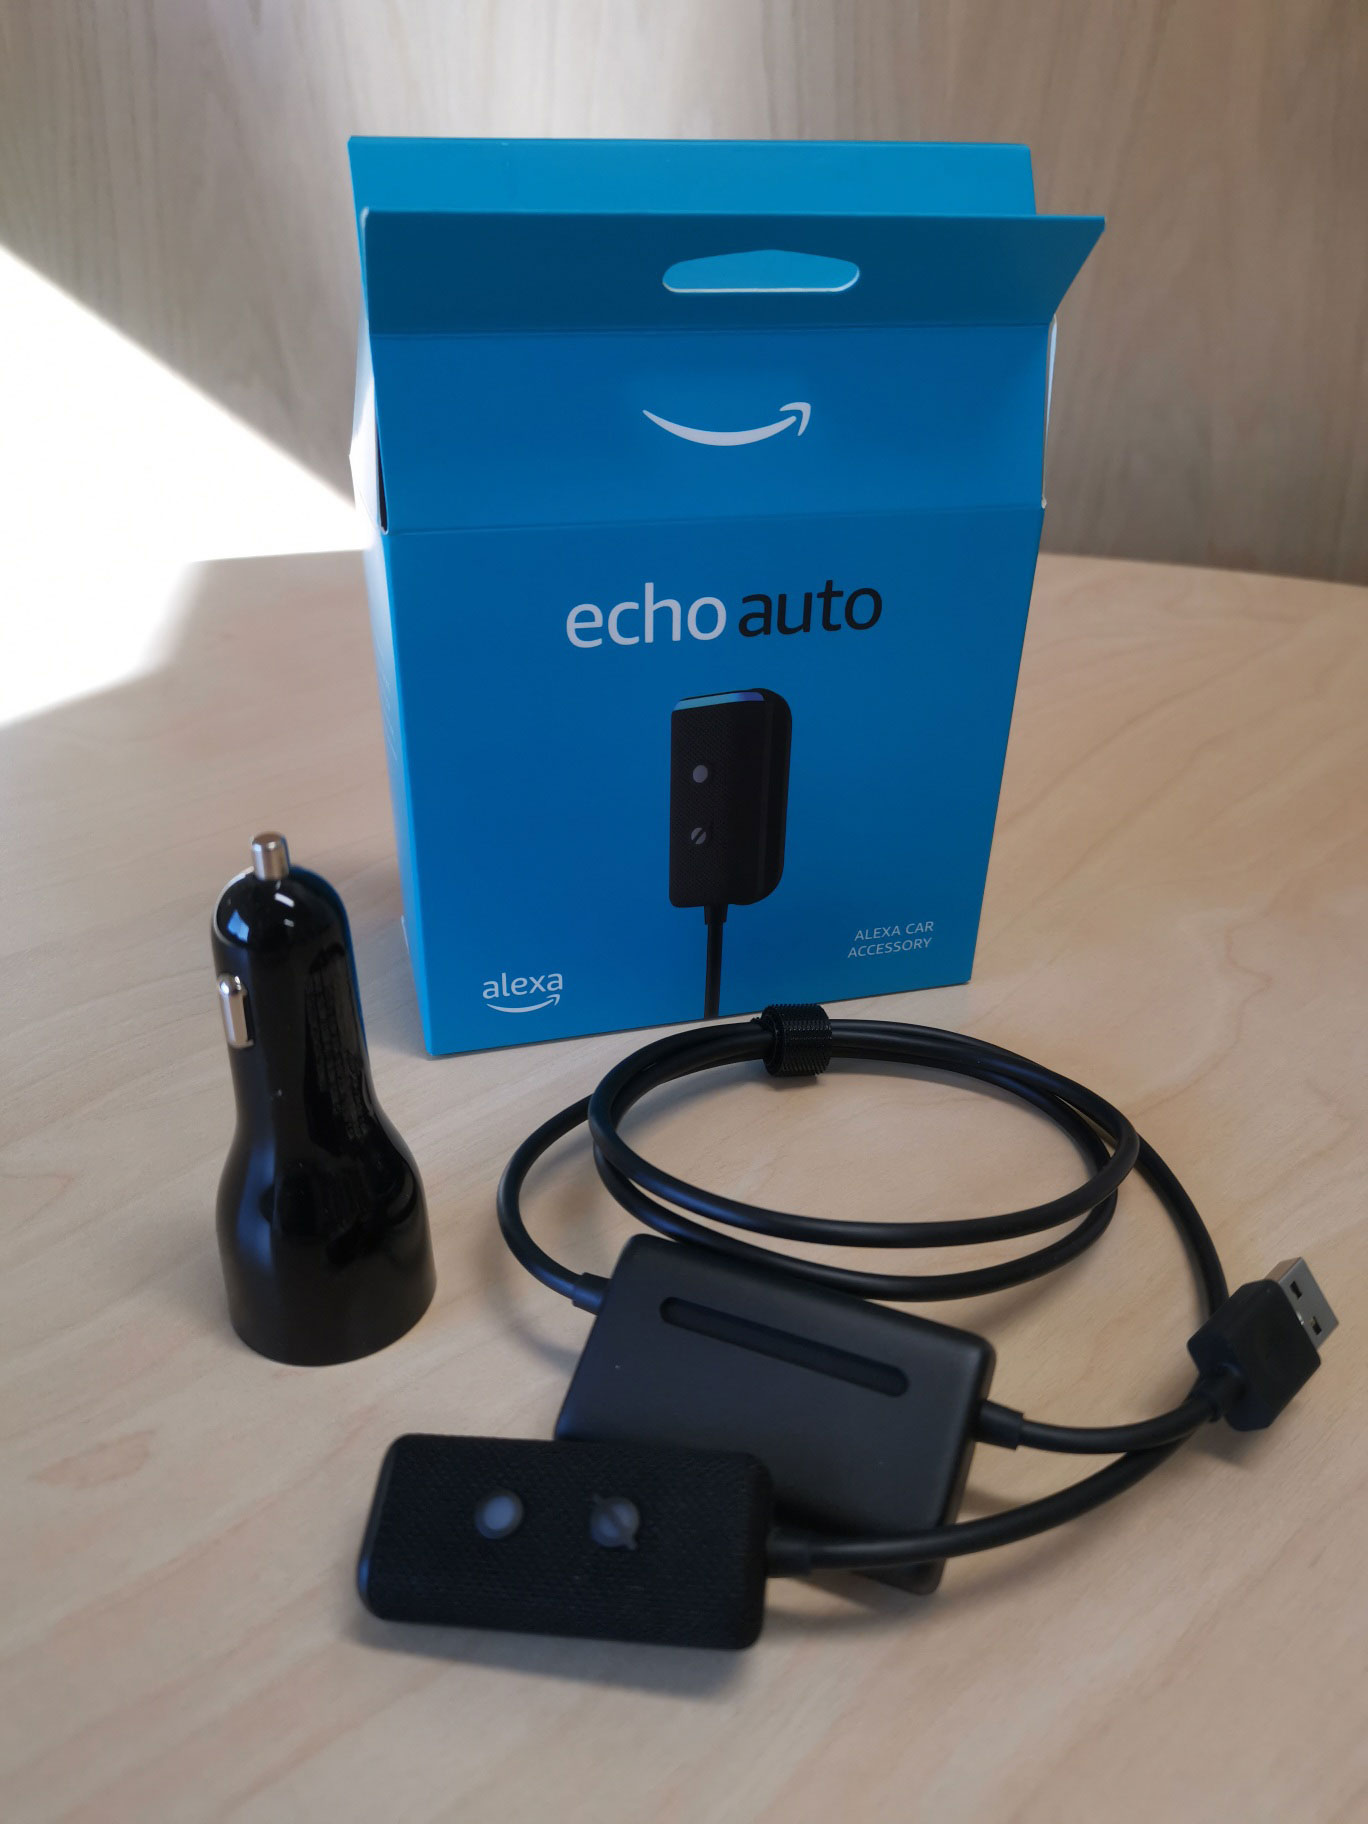 Echo Auto 2nd Gen - Review - Should You Buy One? 